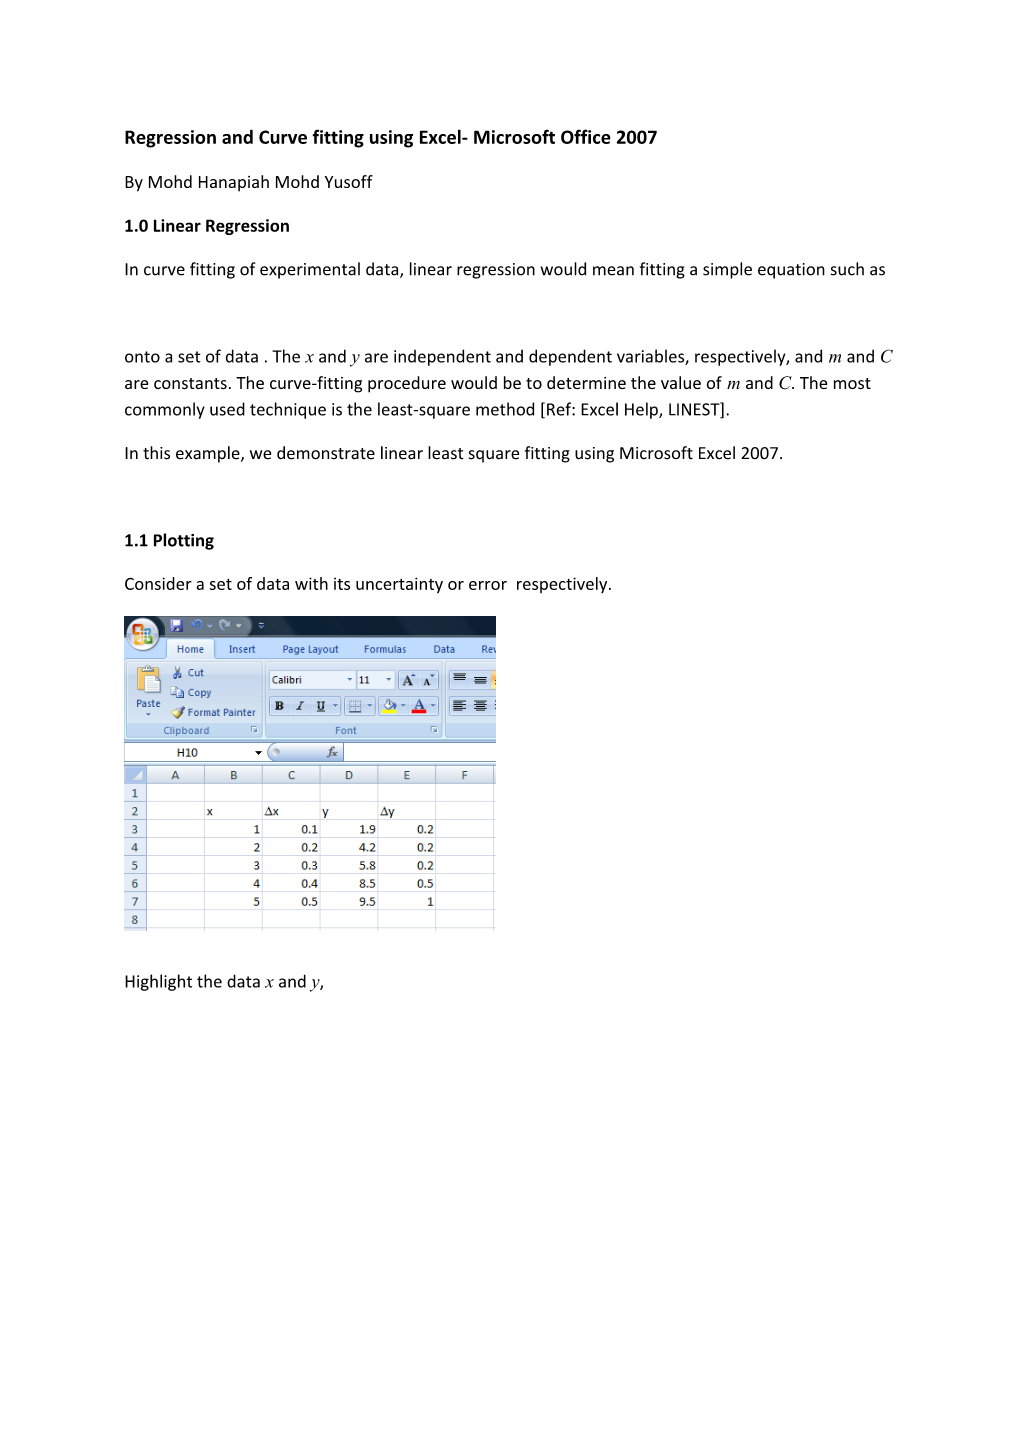 Regression and Curve Fitting Using Excel- Microsoft Office 2007